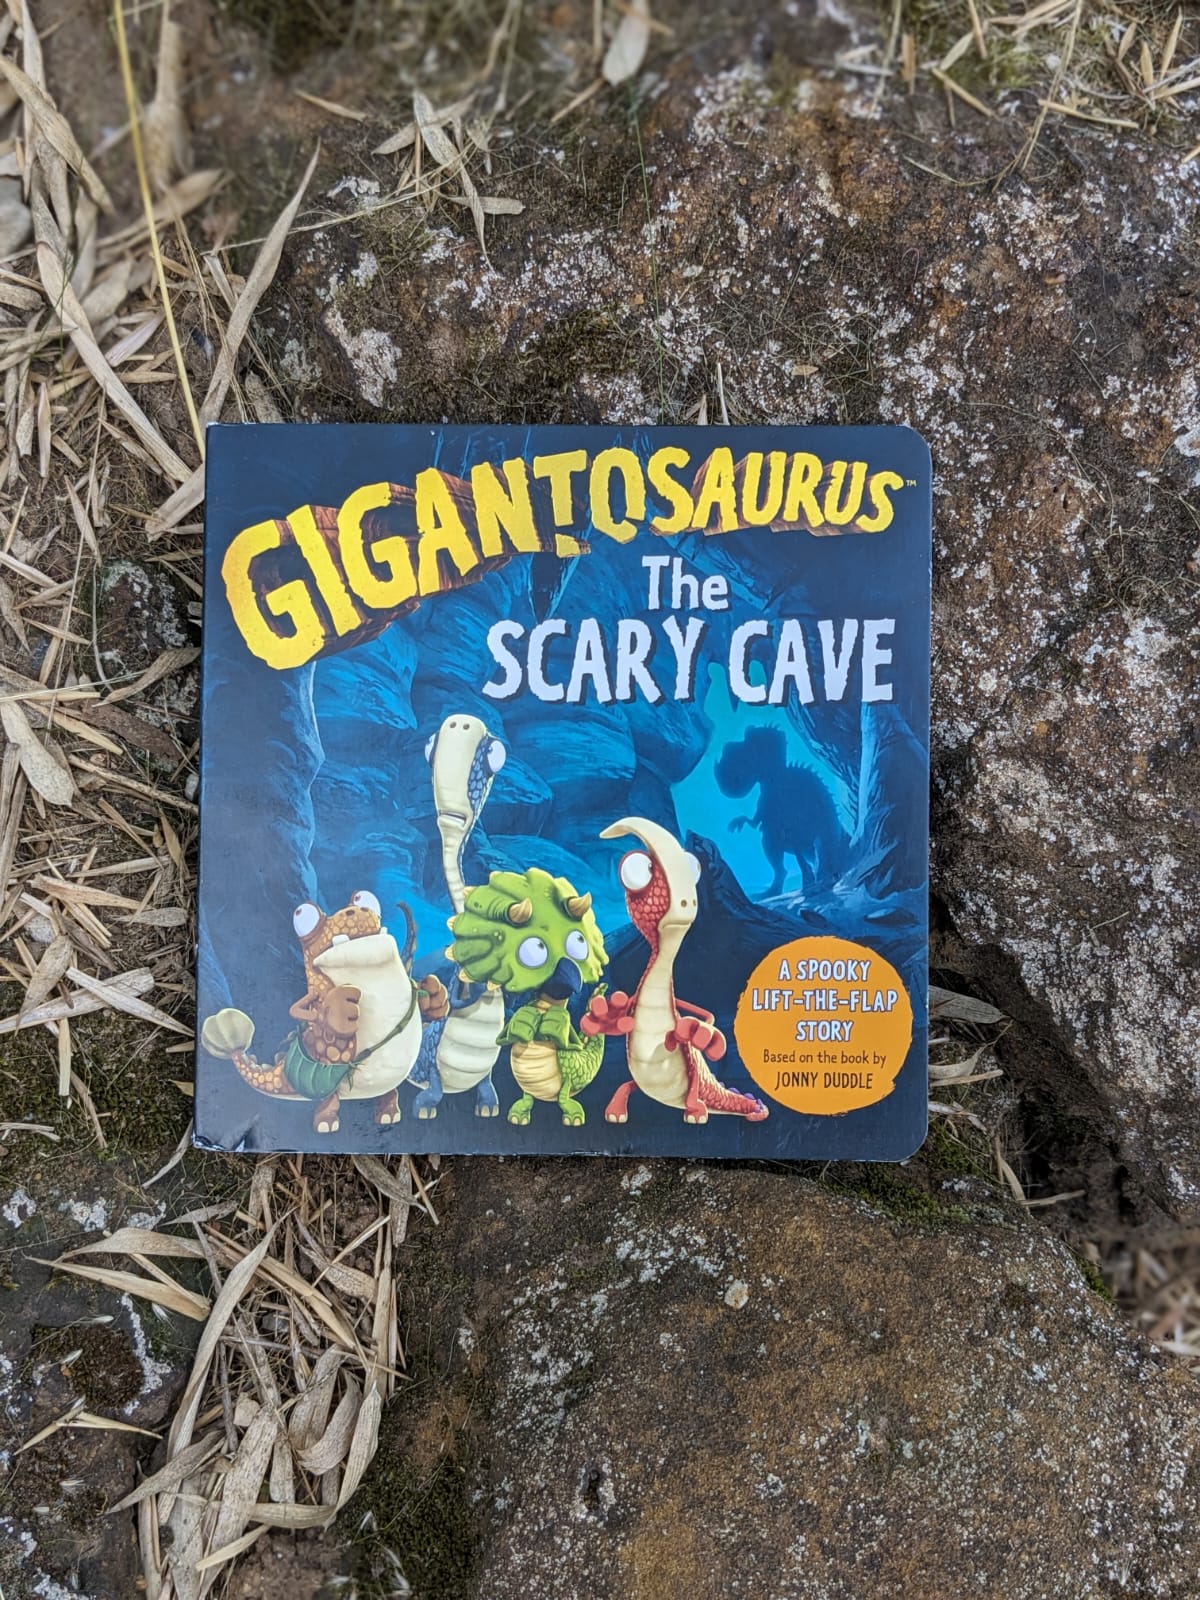 Gigantosaurus - The SCARY CAVE